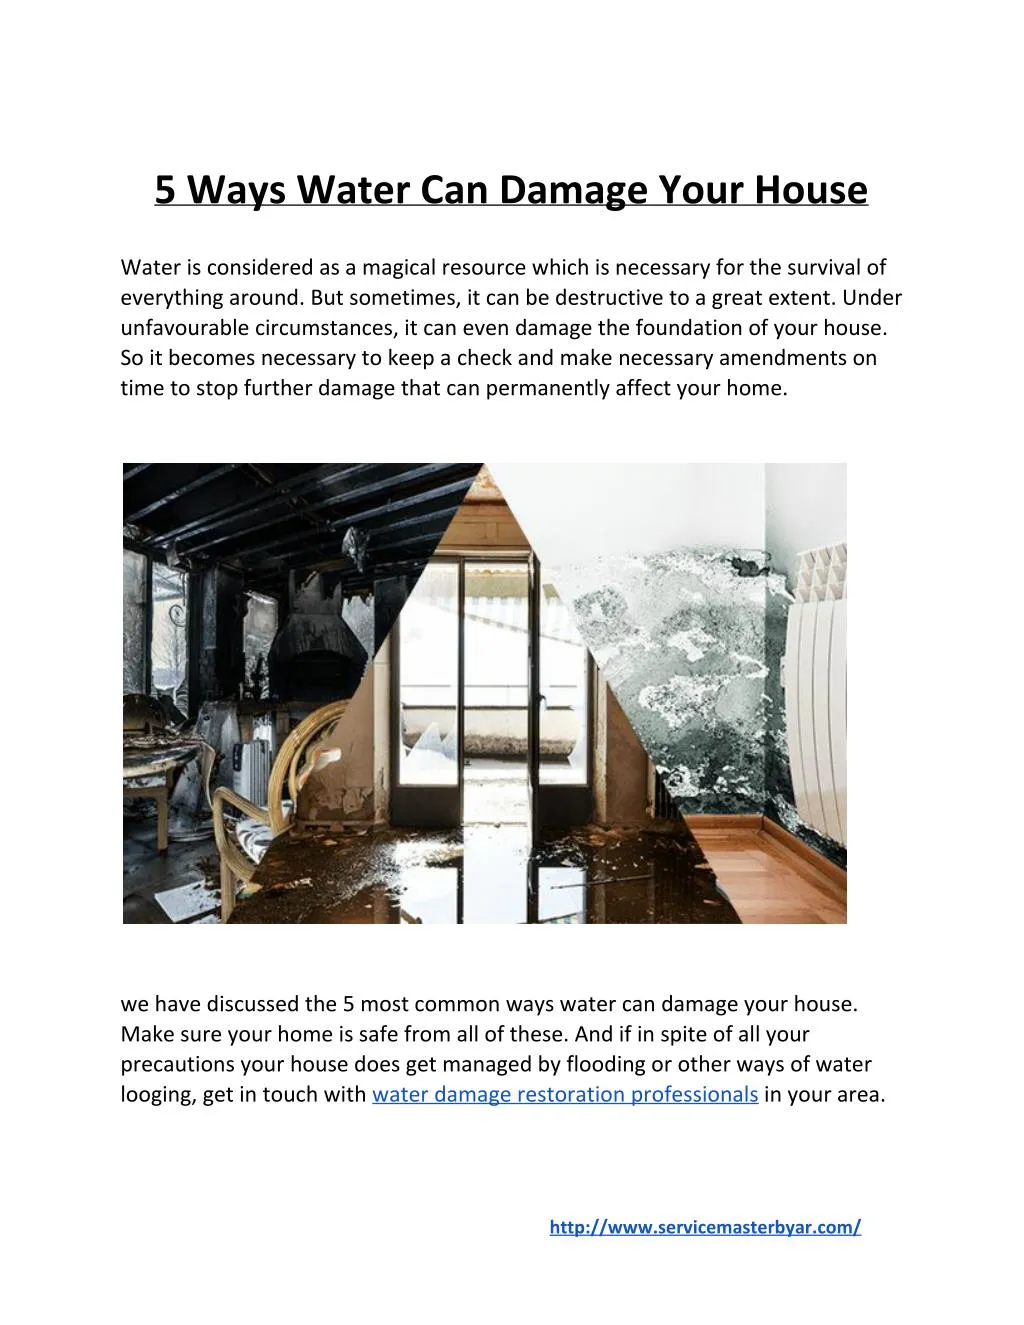 5 ways water can damage your house